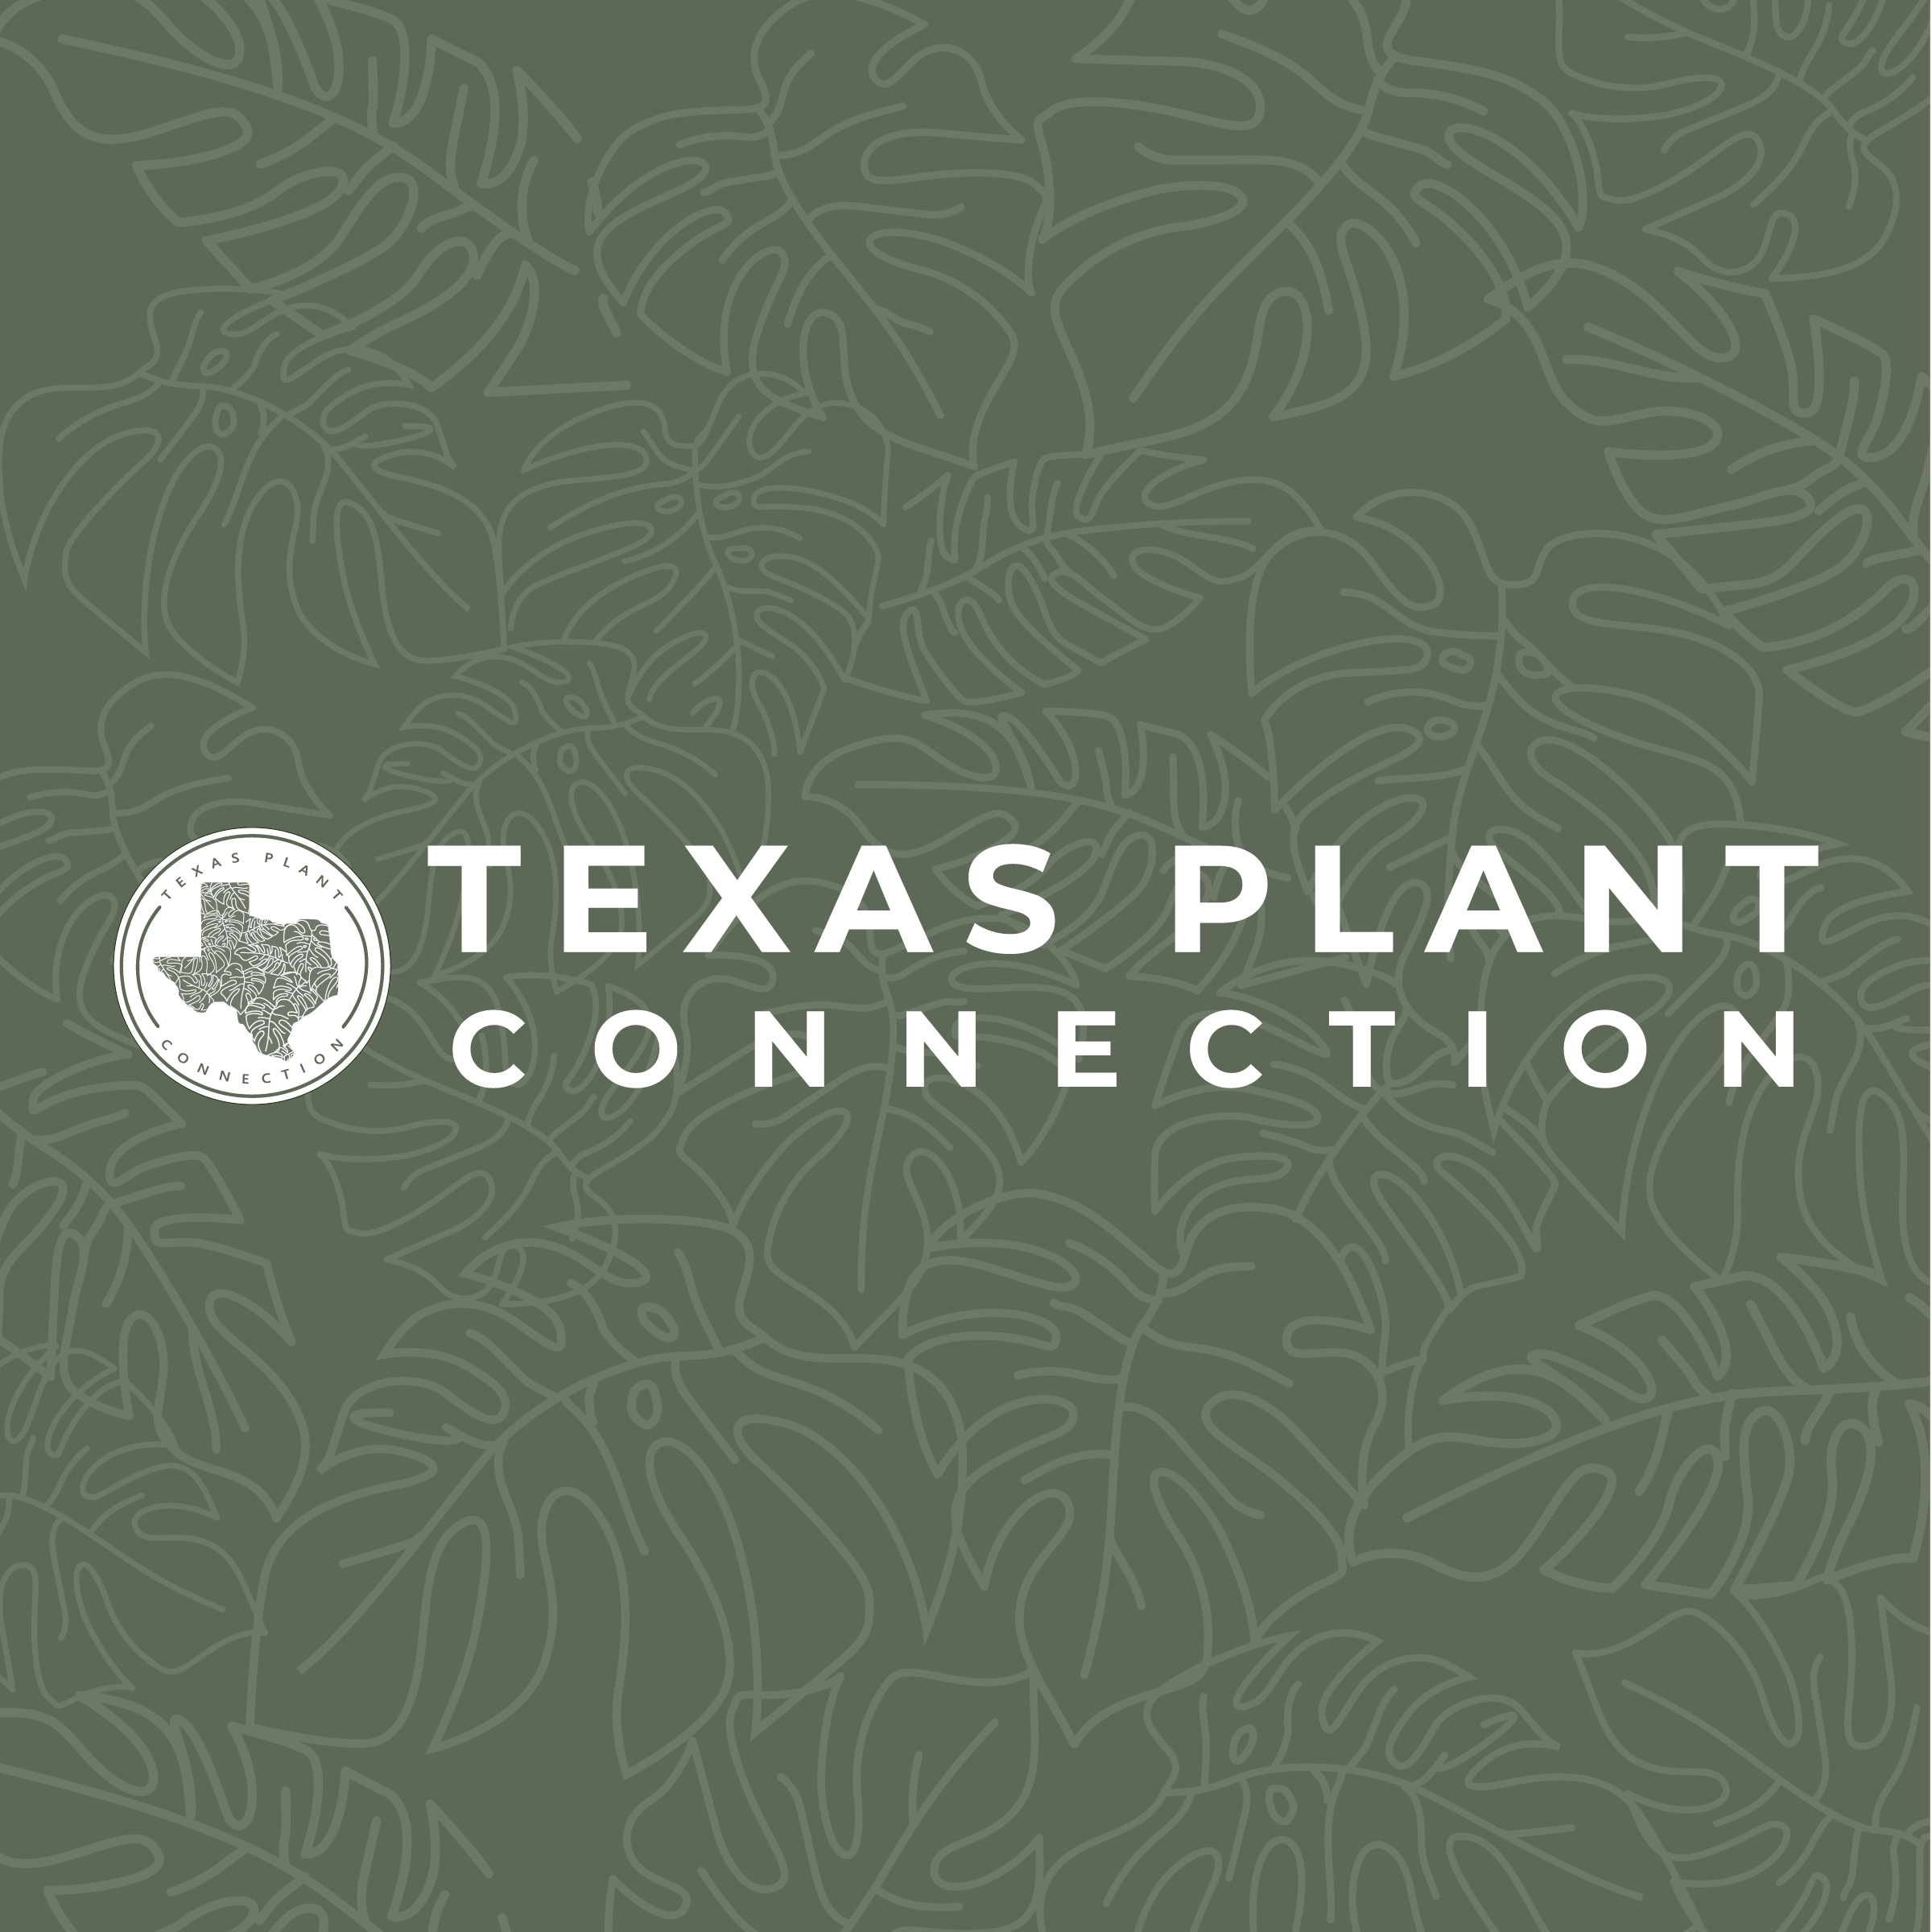 Texas Plant Connection